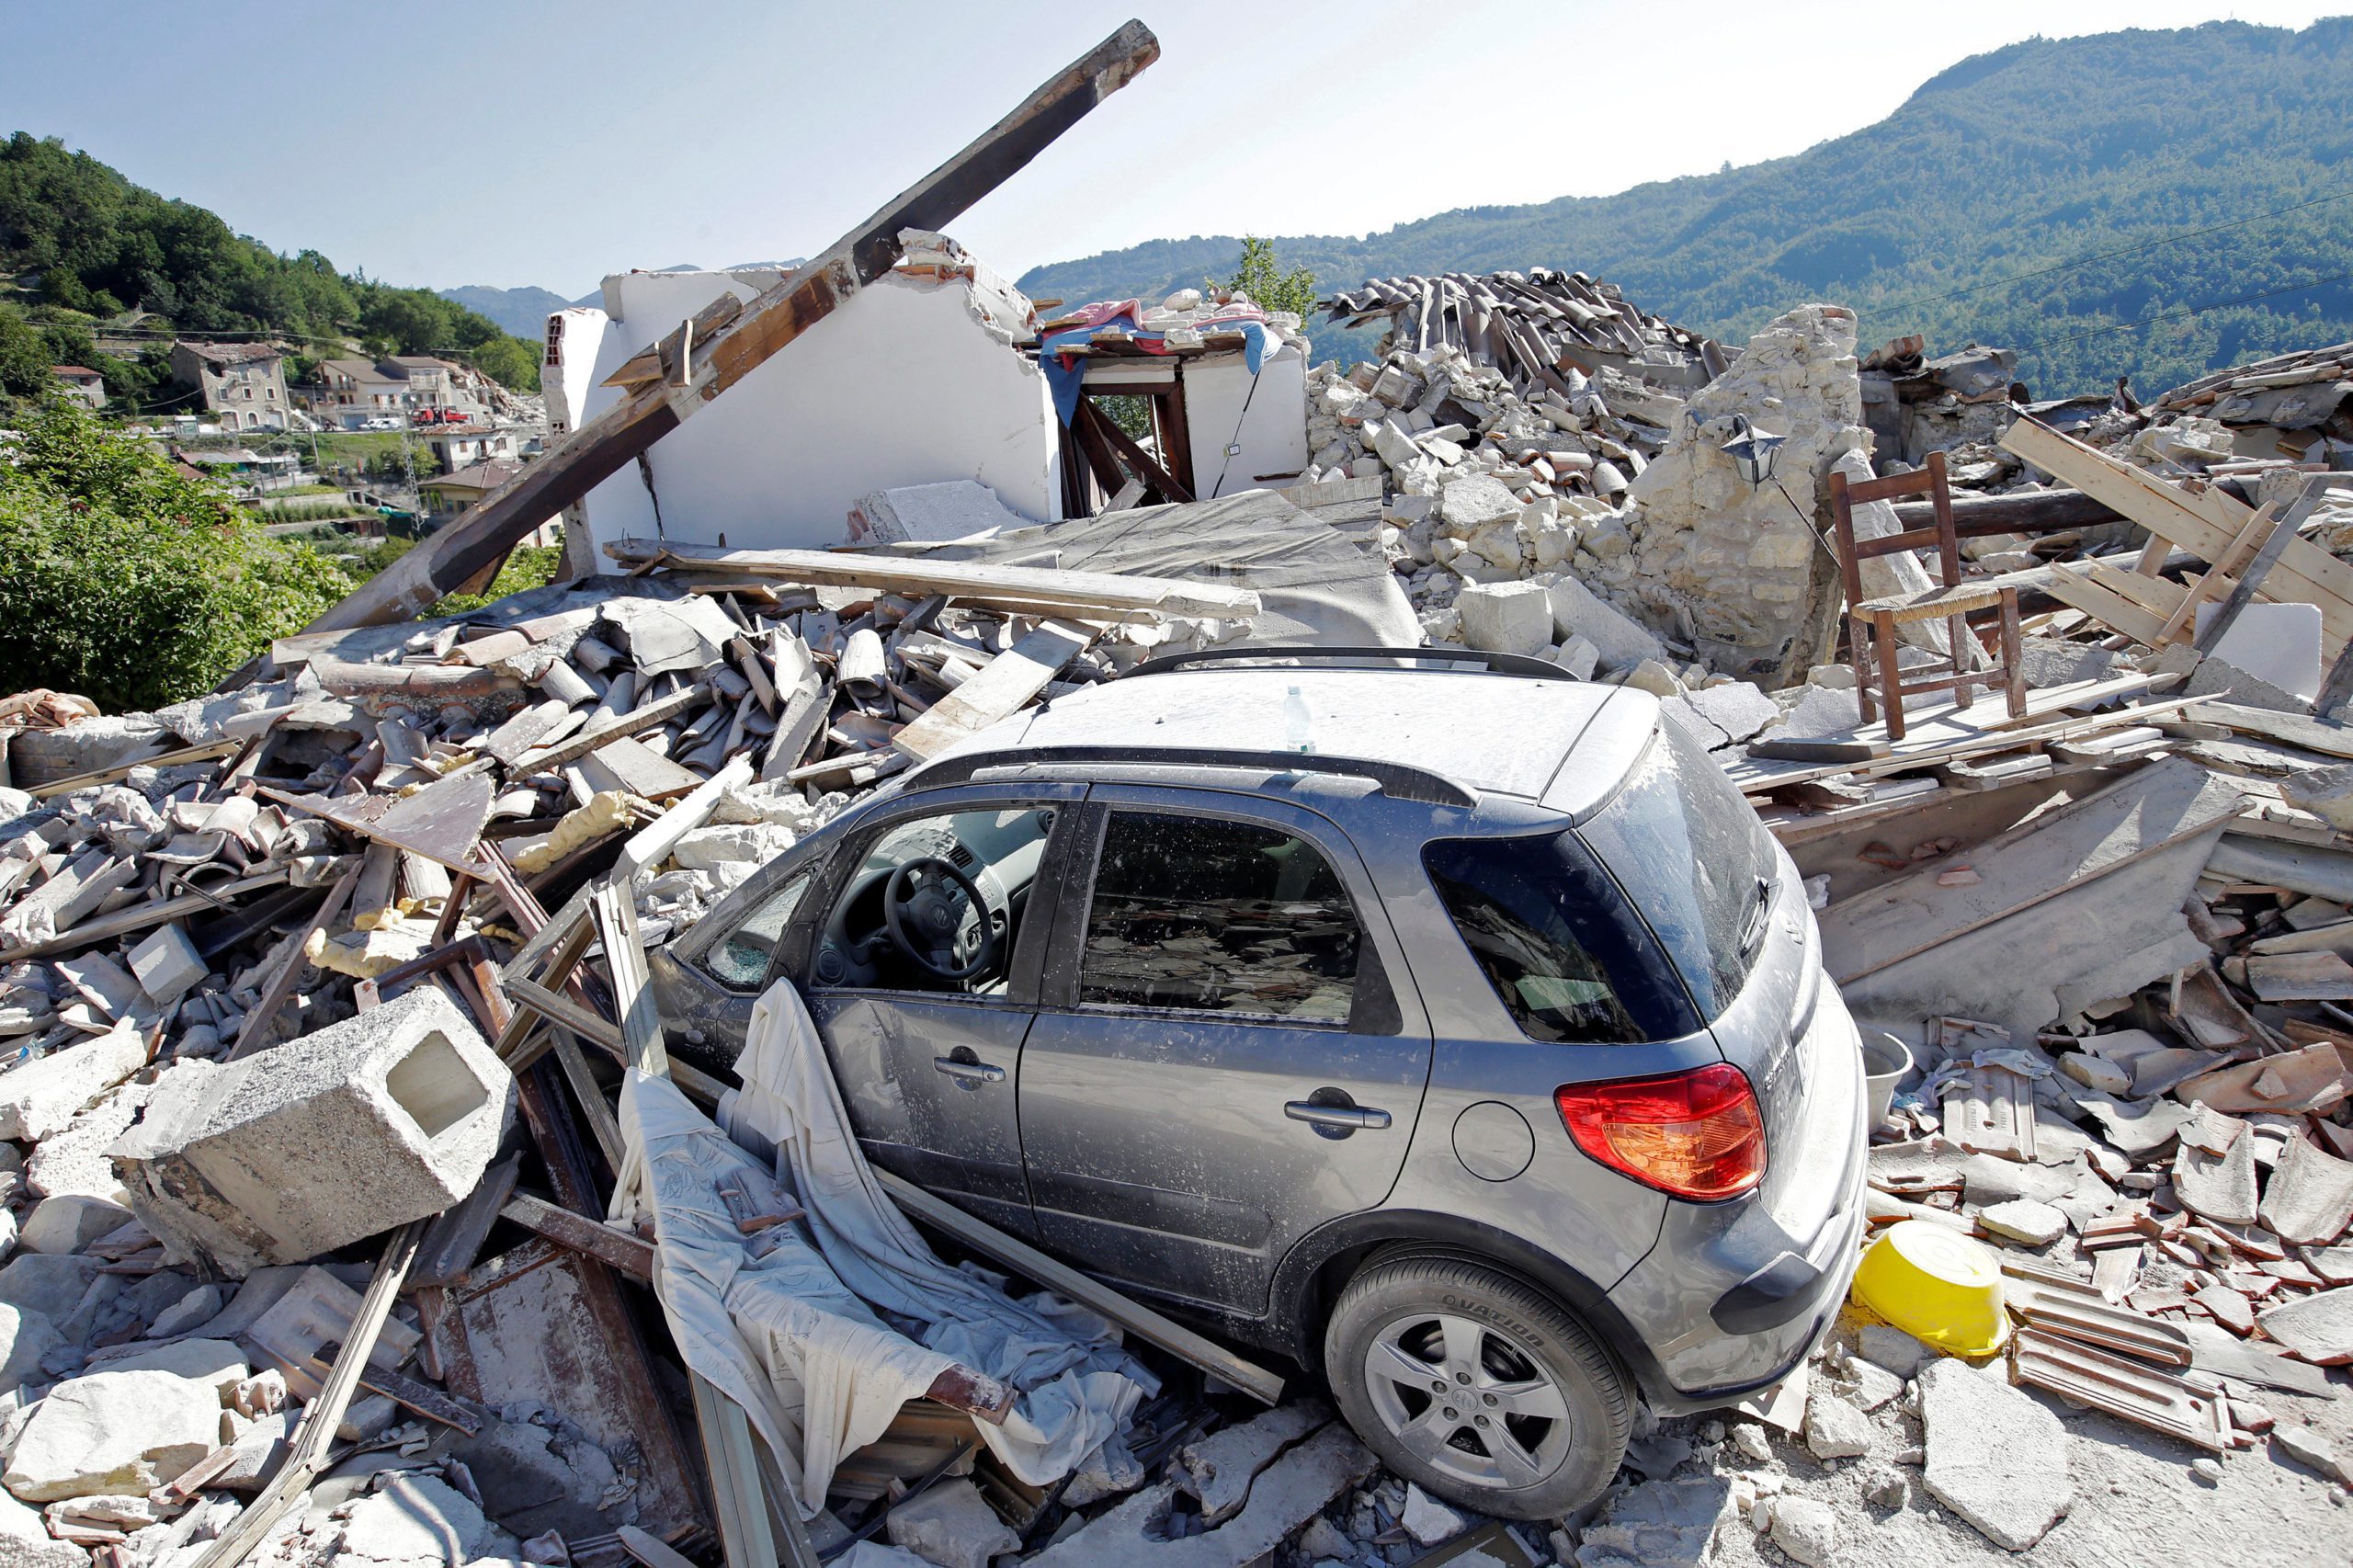 Earthquake Relief Event to Benefit People of Amatrice, Italy